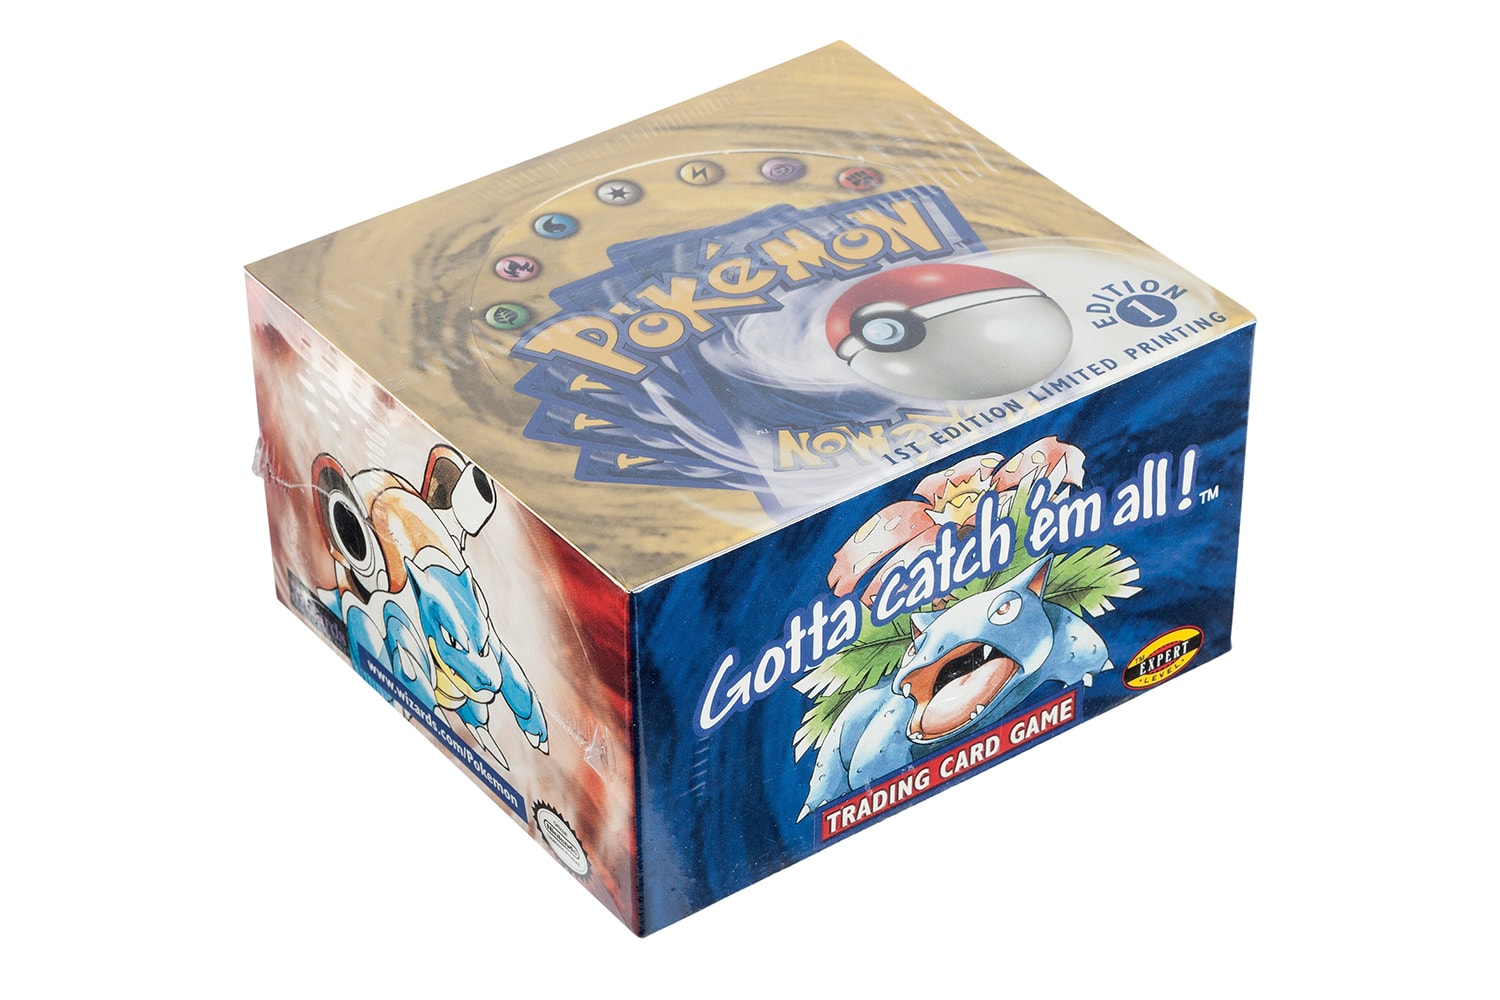 25 Most Valuable First Edition Pokemon Cards - Old Sports Cards